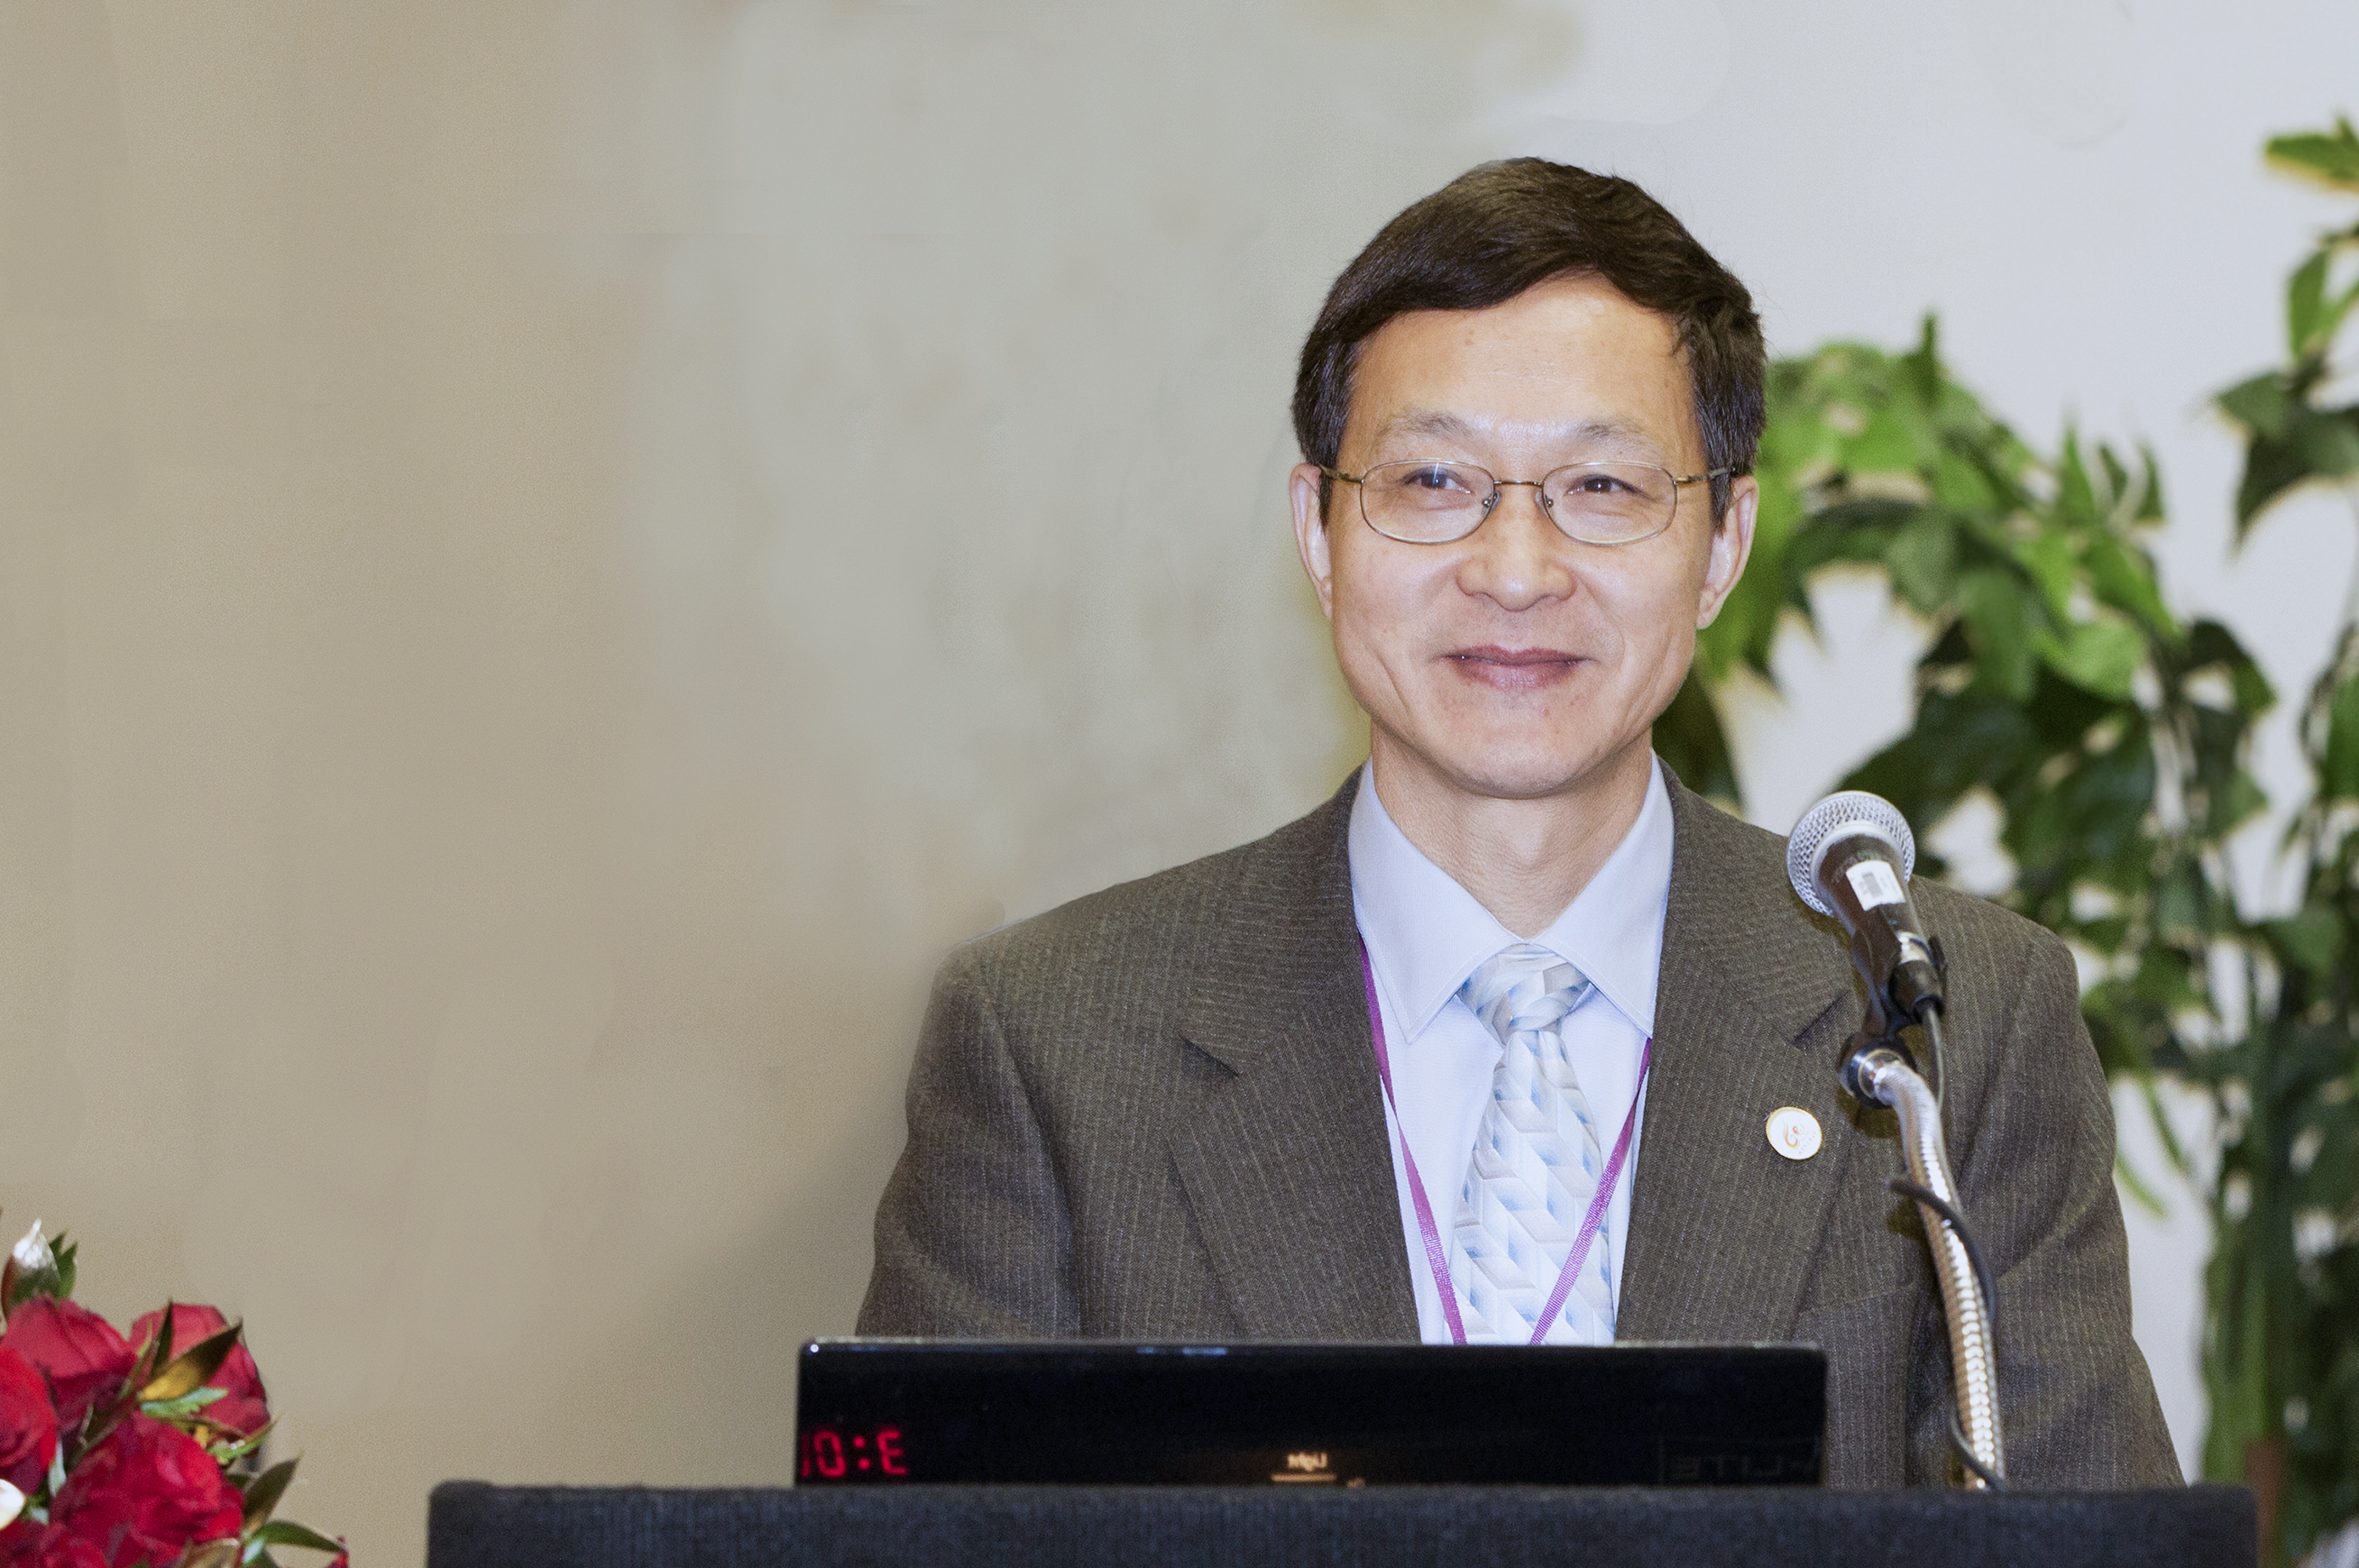 Dr. Shen at a conference speaking